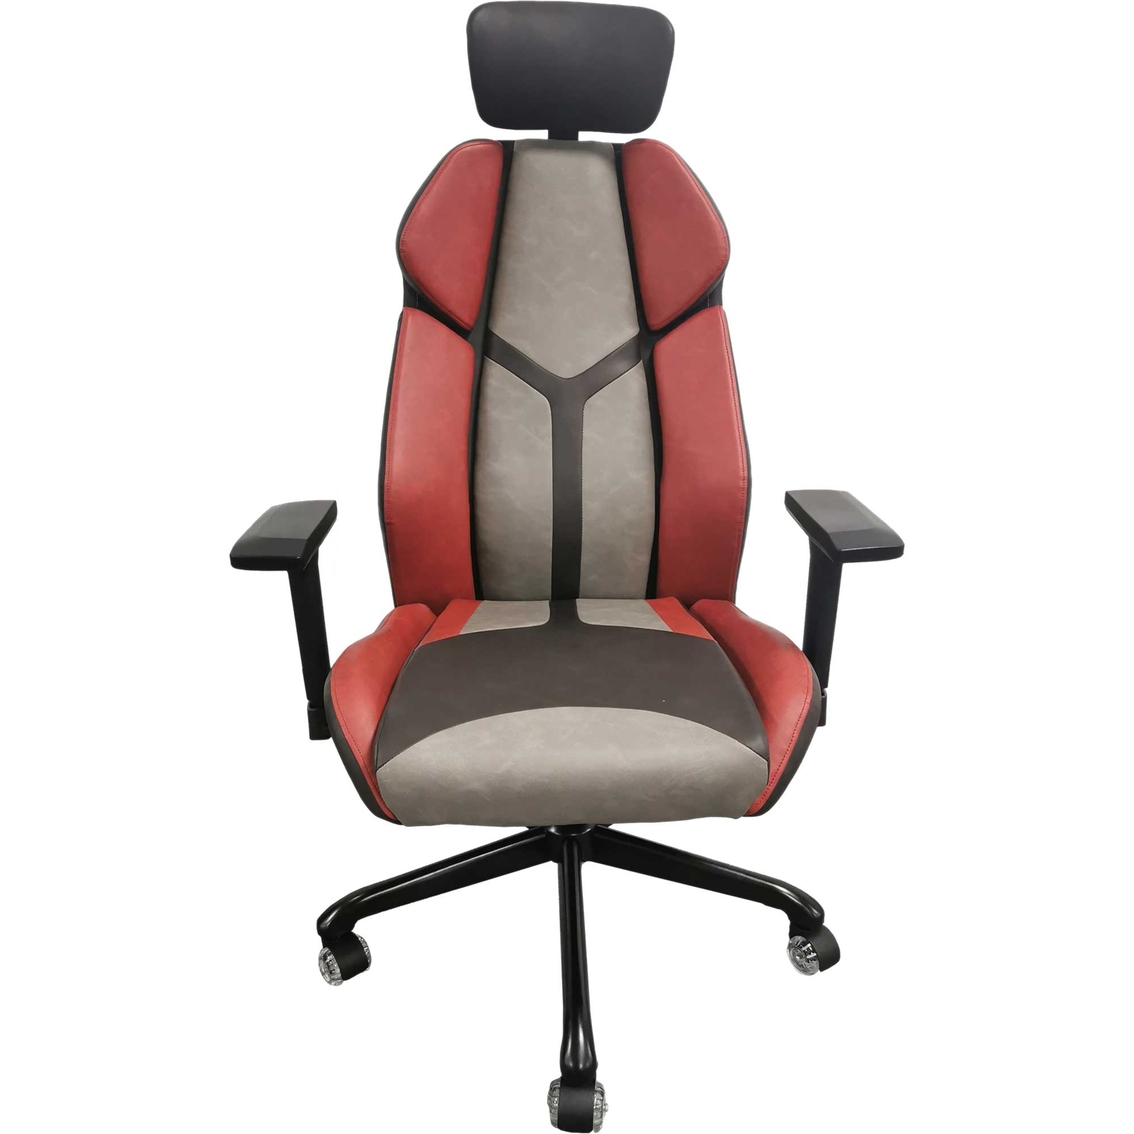 Simply Perfect High Back Gaming Chair, Antique Finish - Image 2 of 2